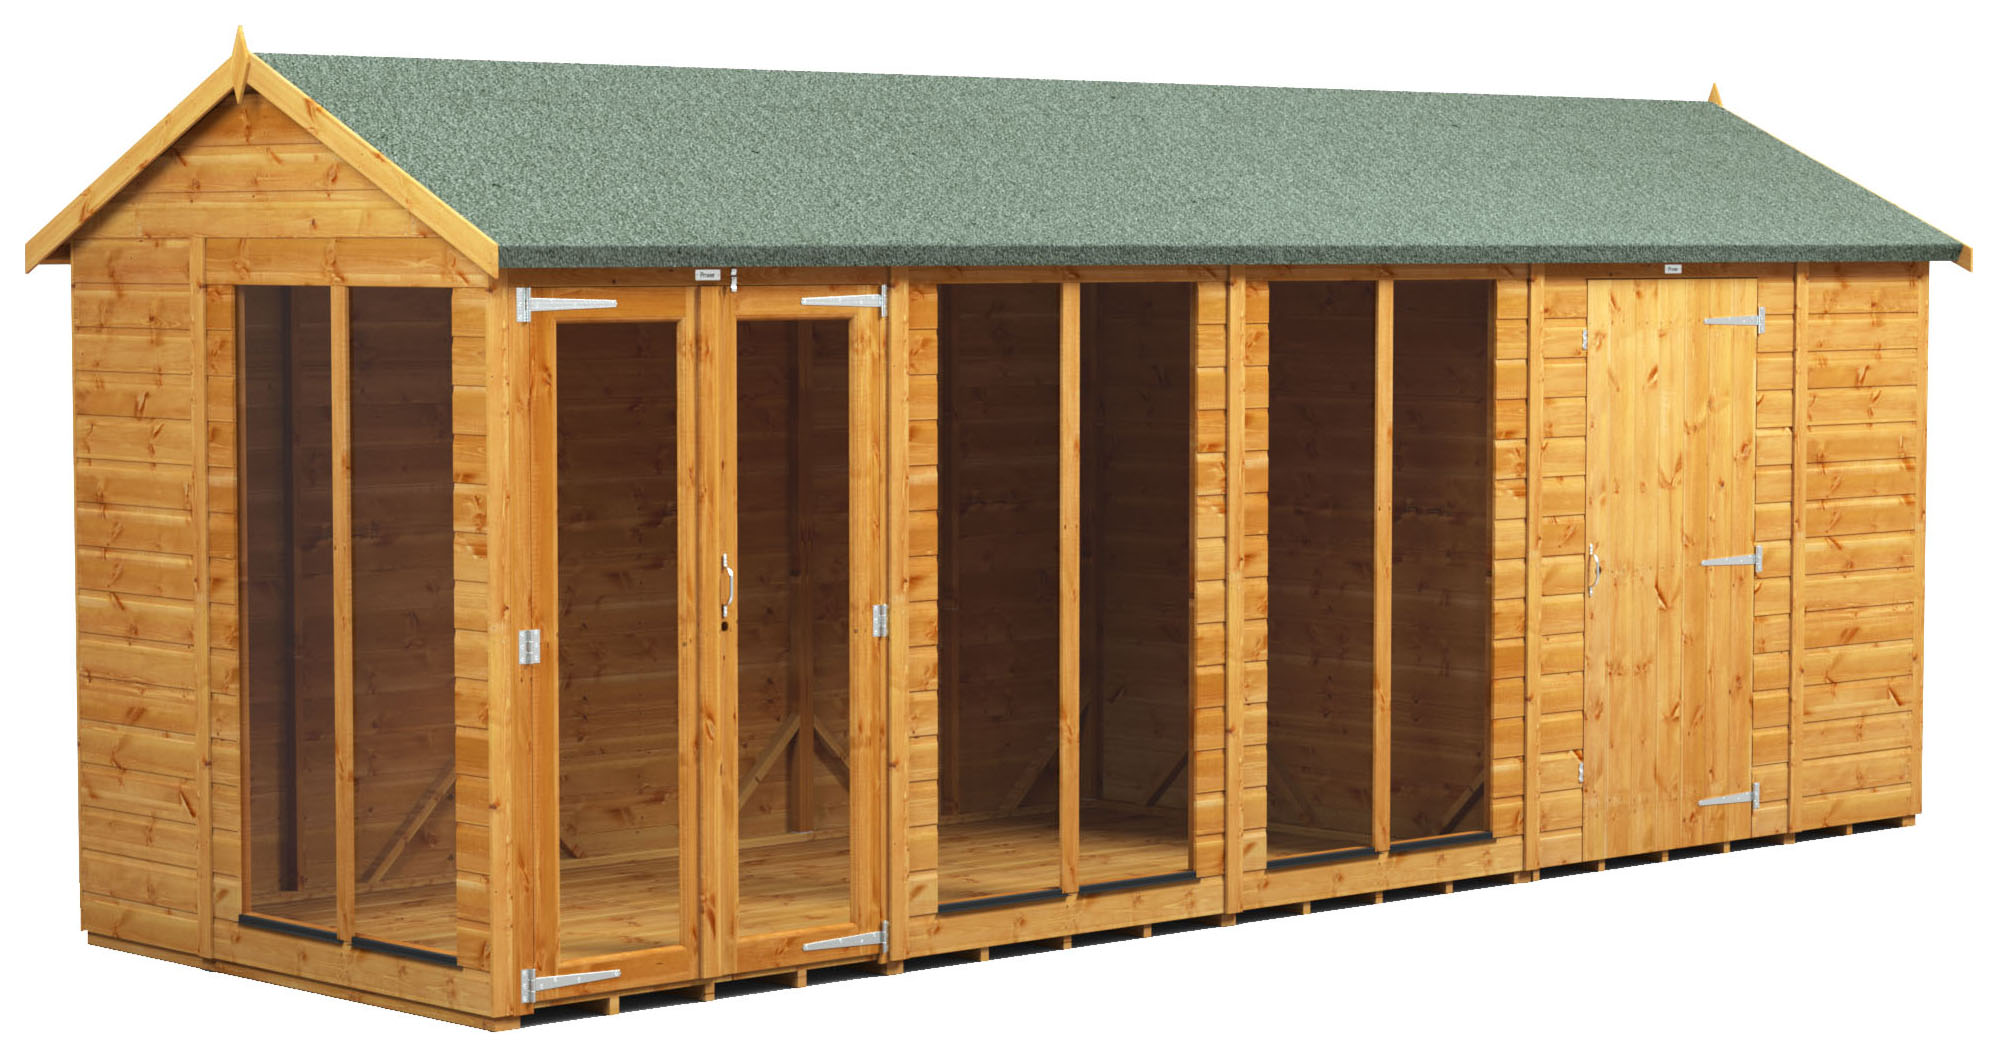 Image of Power Sheds 18 x 6ft Apex Shiplap Dip Treated Summerhouse - Including 6ft Side Store